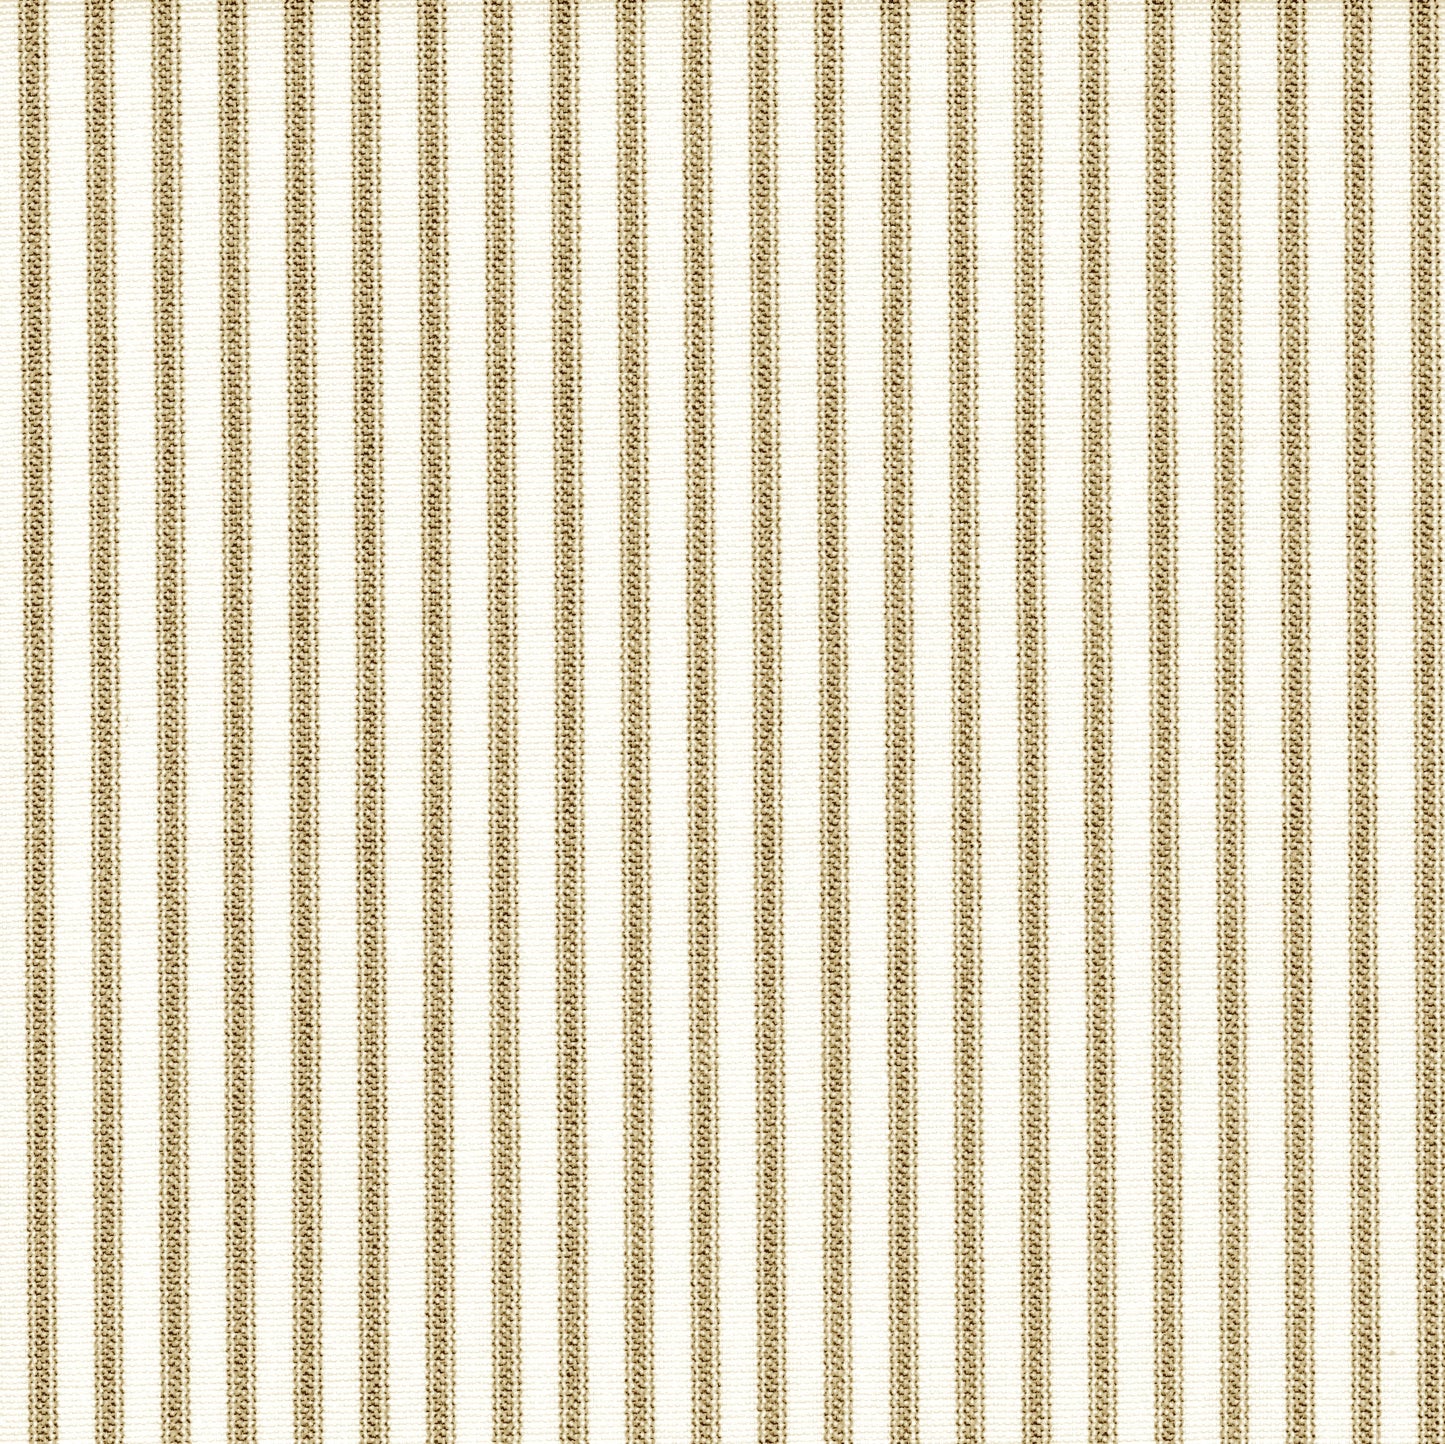 tailored valance in farmhouse rustic brown ticking stripe